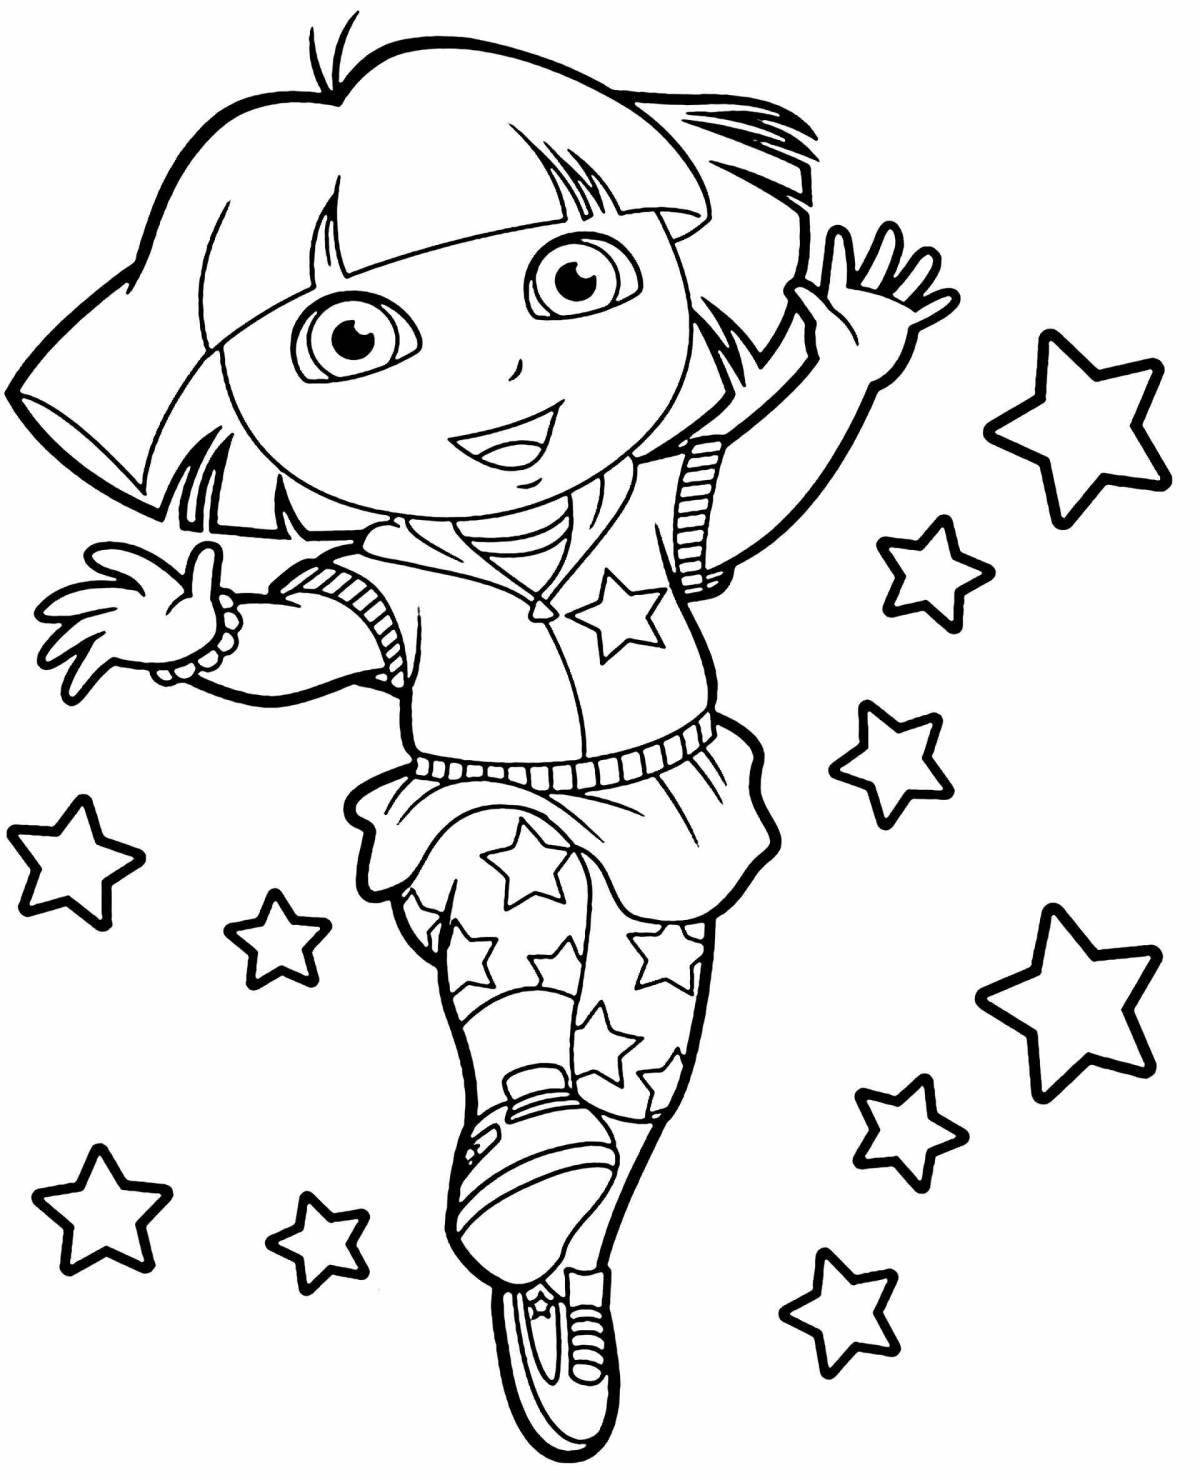 Colorful Dora Singer Coloring Page